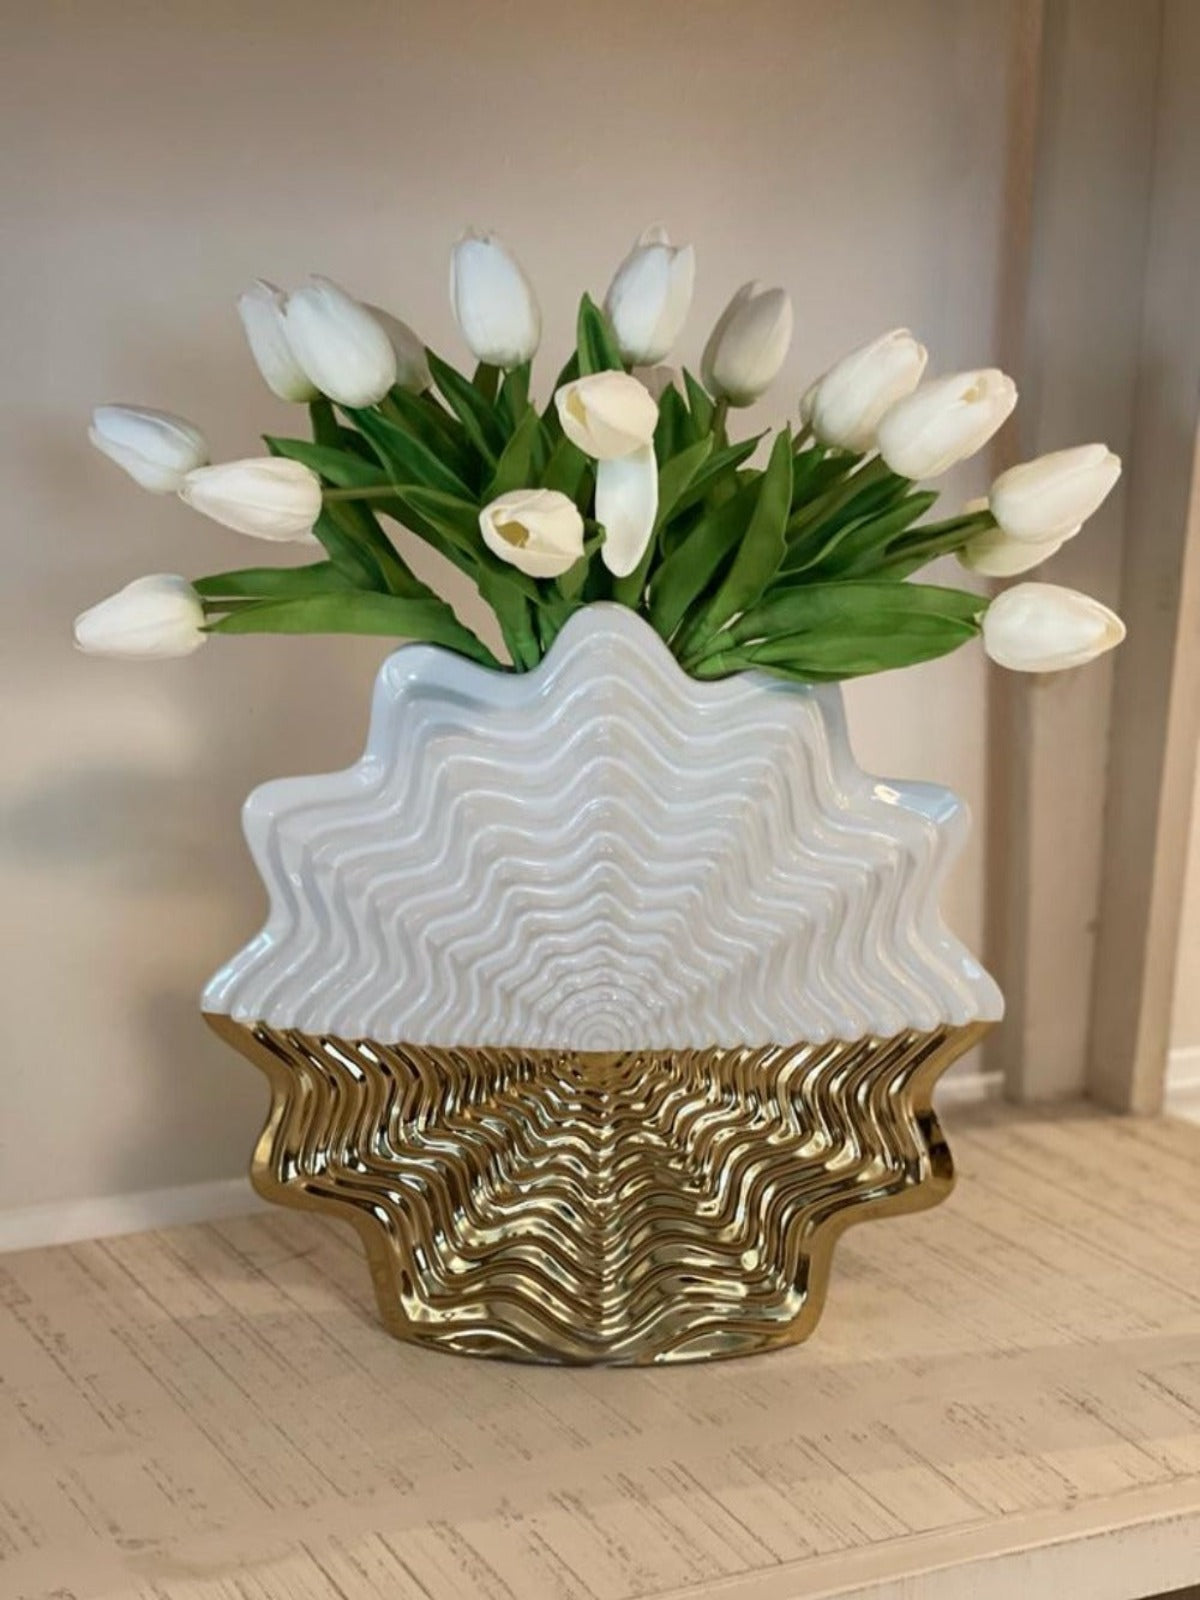 11H White and Gold Star Designed Porcelain Vase with Faux Flowers - KYA Home Decor